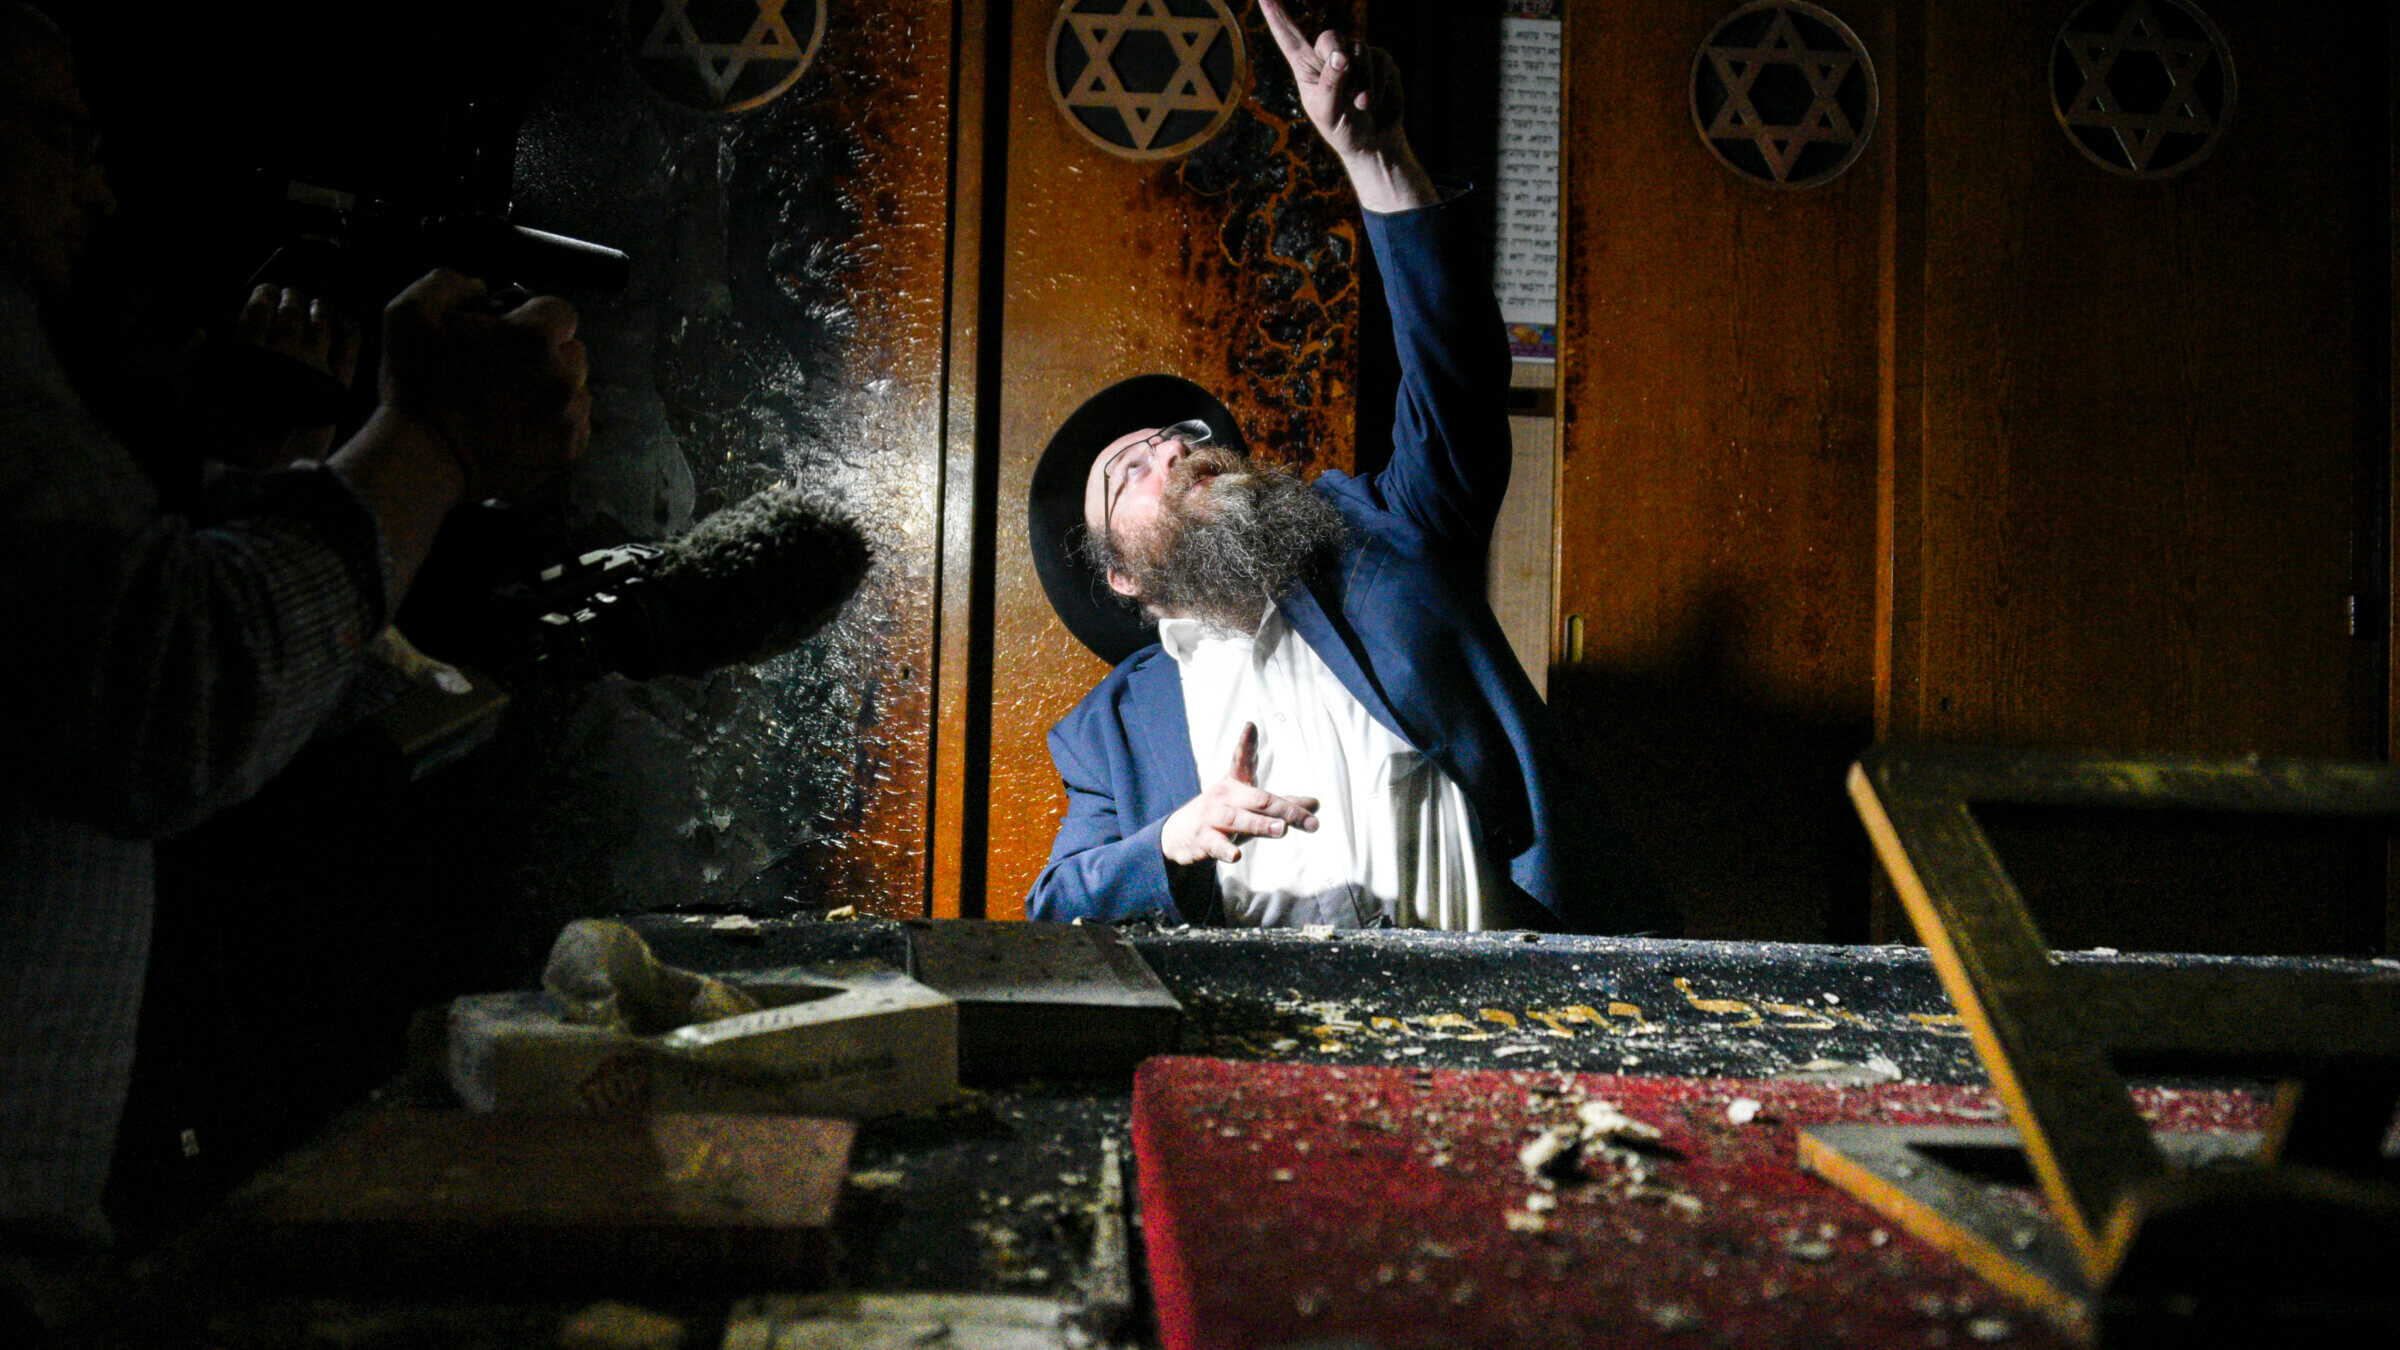 The rabbi of Rouen, Chmouel Lubecki, shows the fire damage in Rouen's main synagogue.